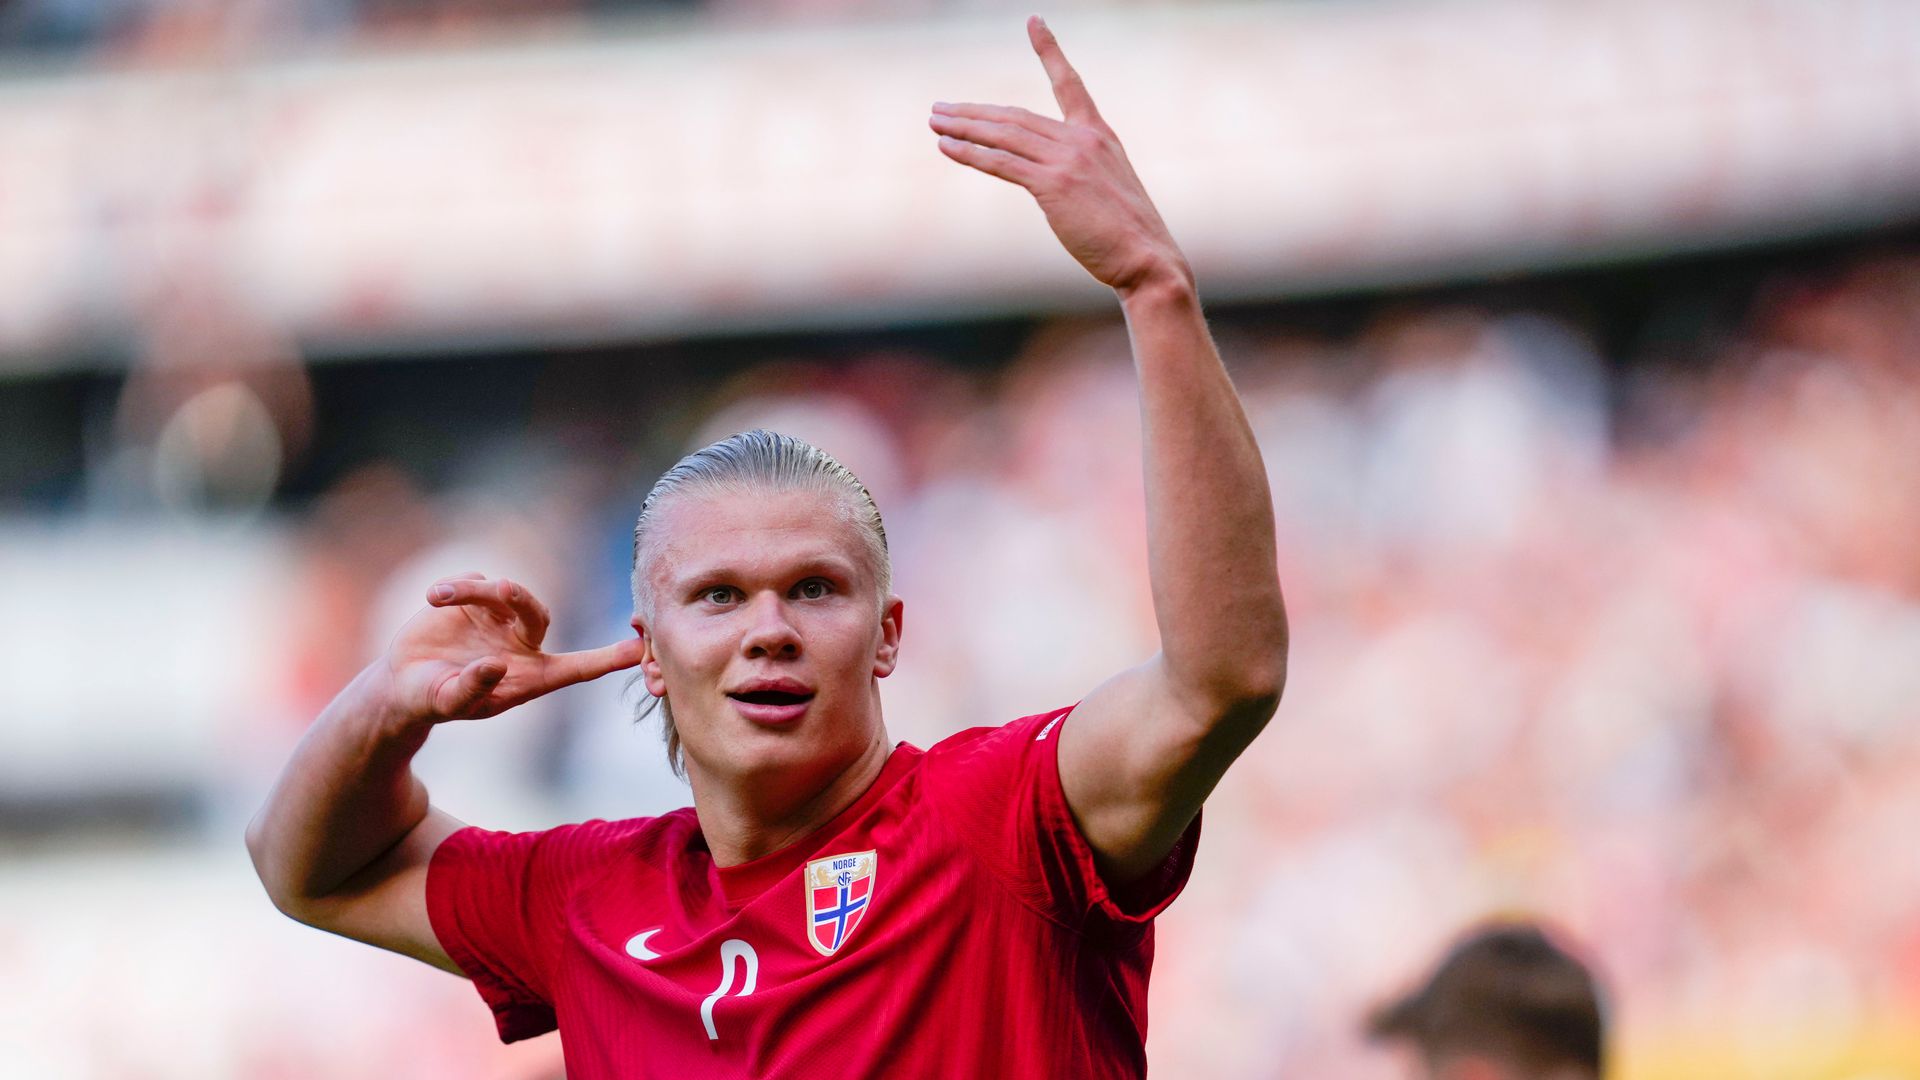 Nations League round-up: Spain go top of group, Haaland shines for Norway